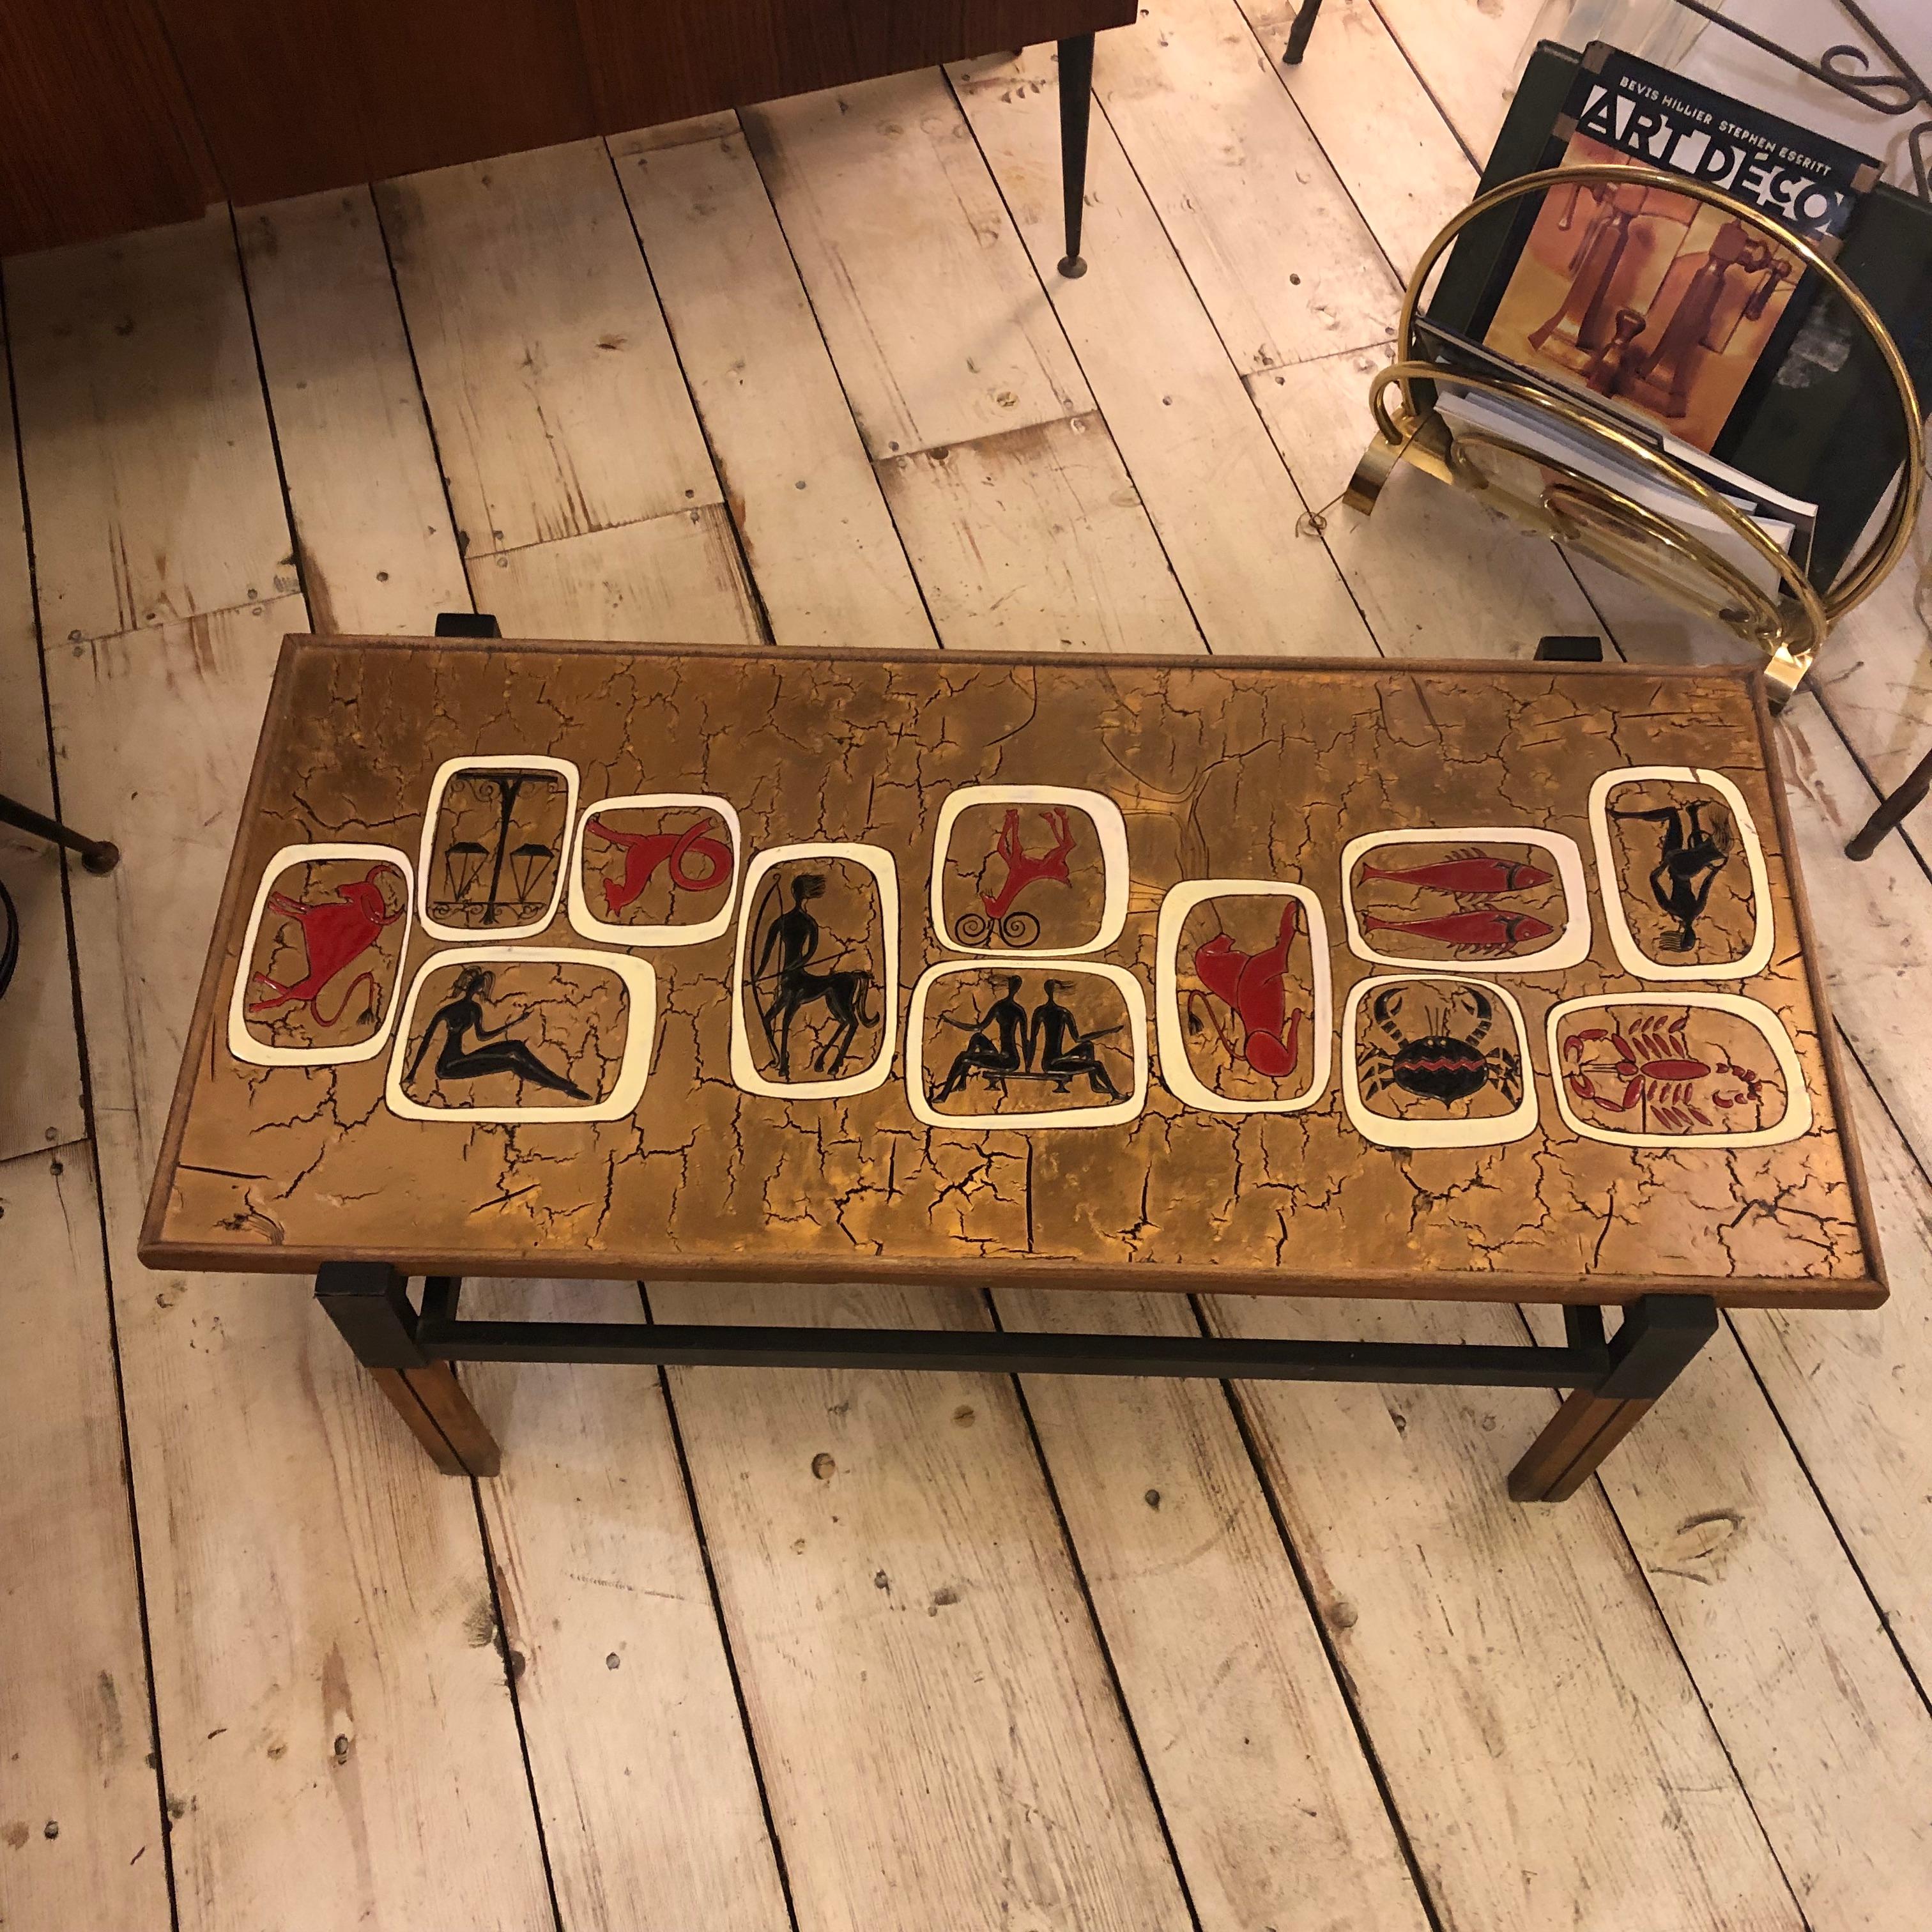 Particular gold enameled rectangular coffee table, with red and black zodiac signs. It's made in Italy in the Seventies.